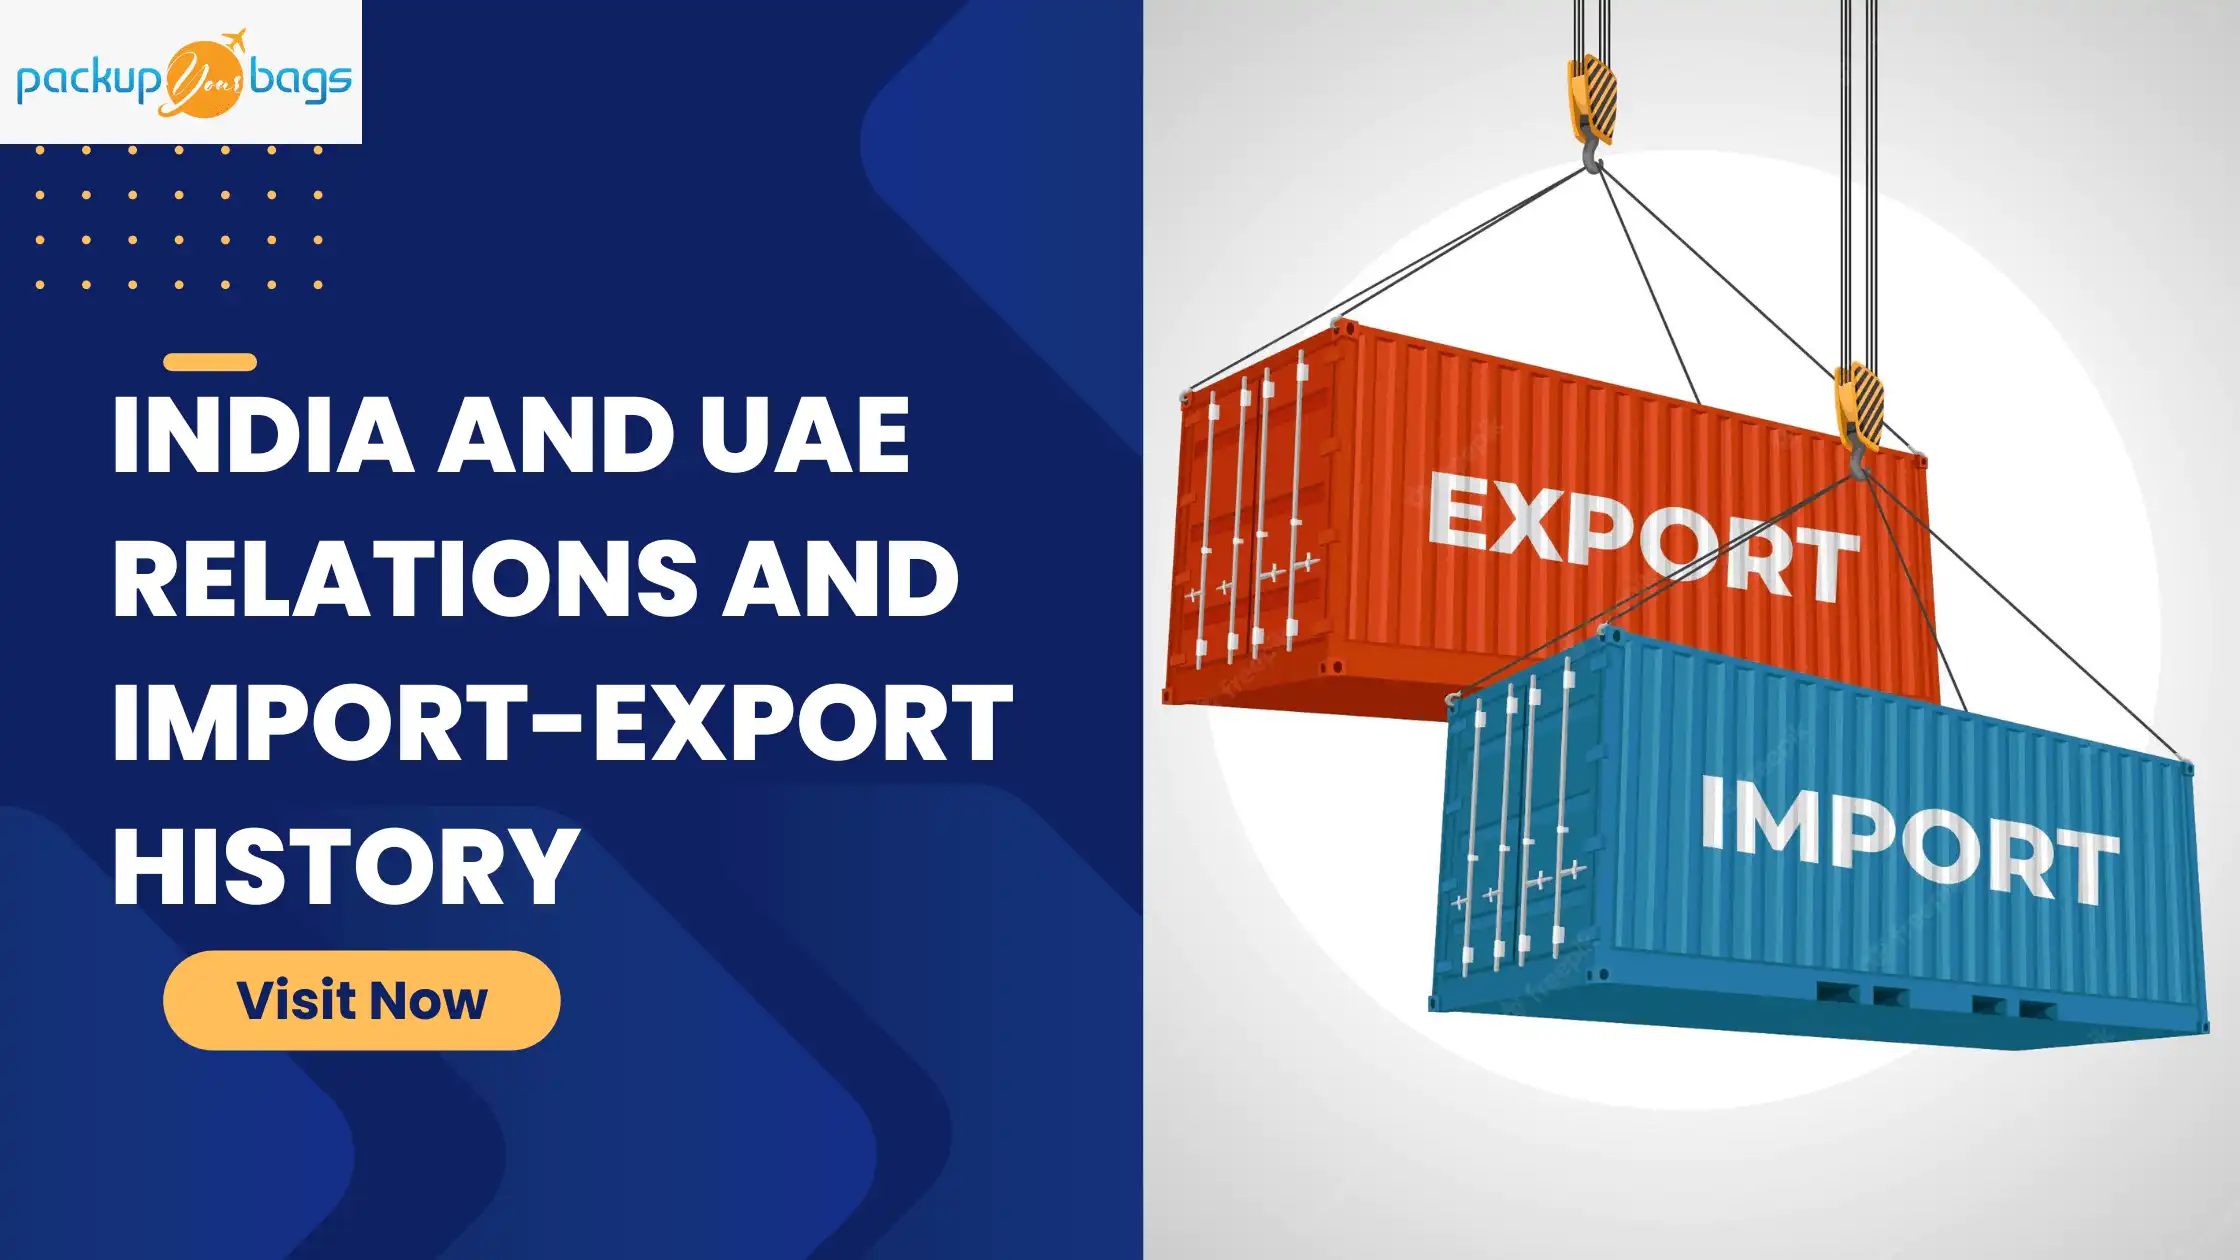 India and UAE relations and import-export history